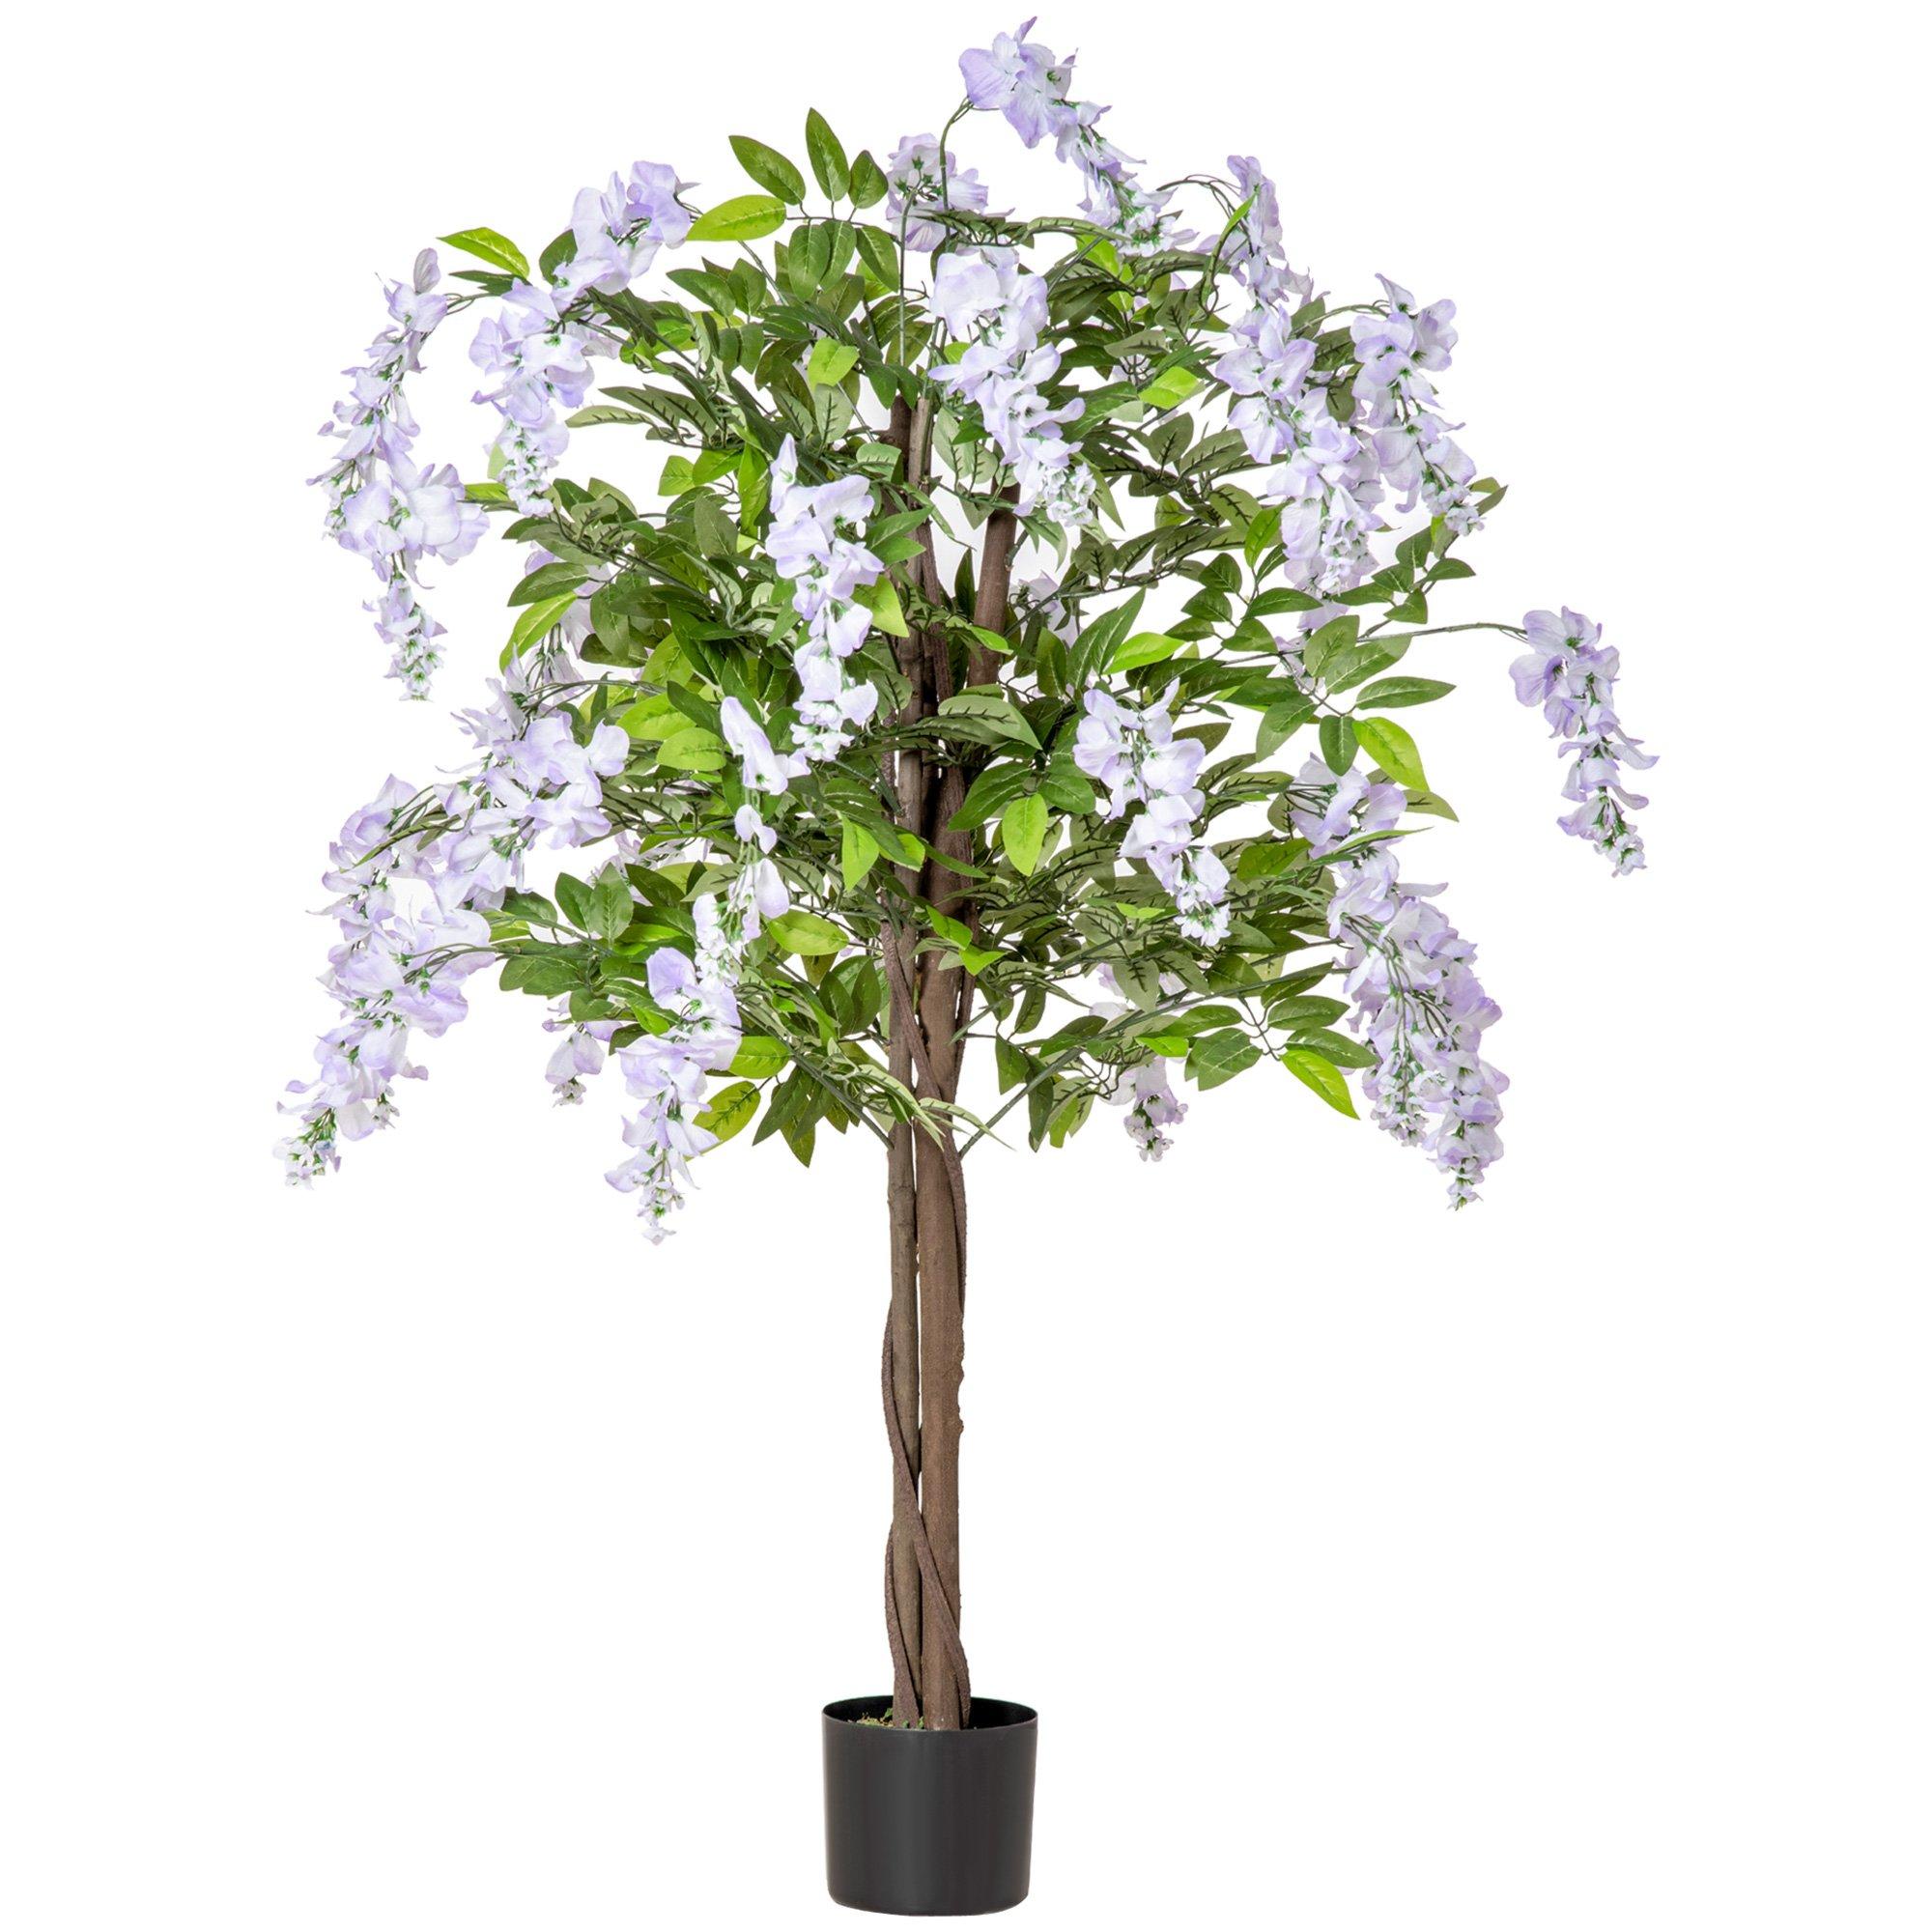 Artificial Realistic Wisteria Flower Tree in Pot Plant for Outdoor